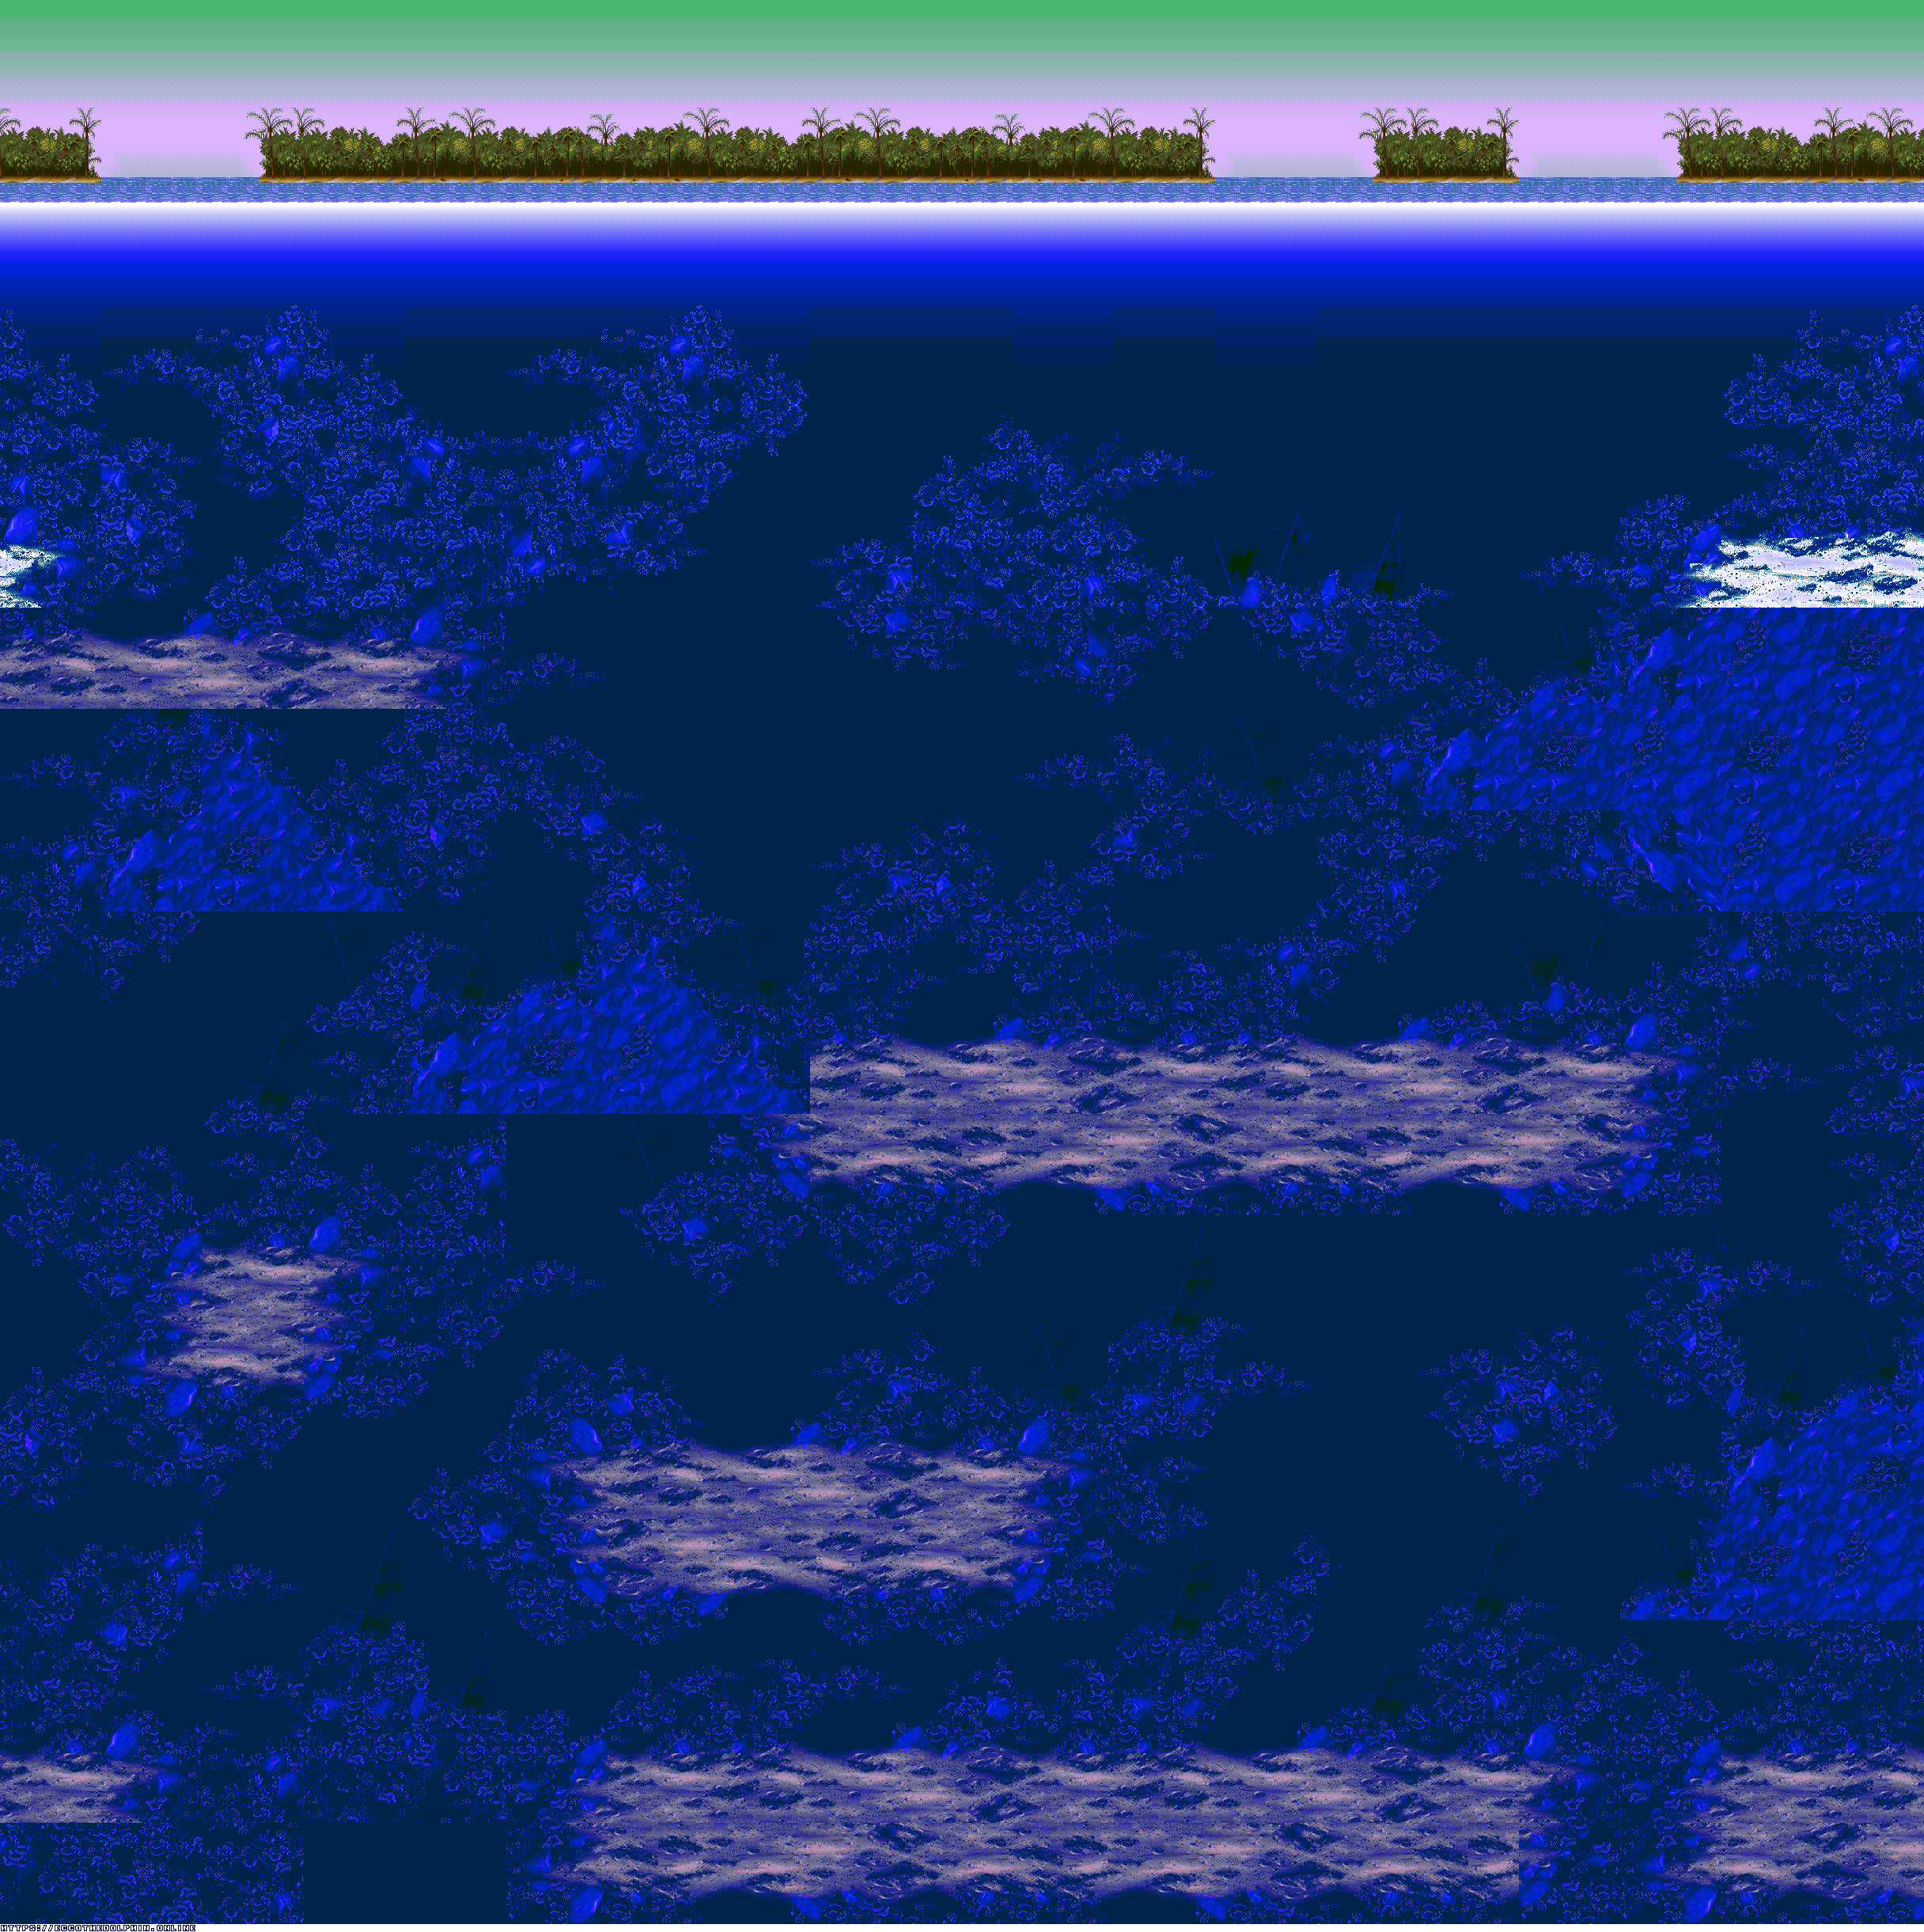 Ecco: The Tides of Time - Two Tides (Background)